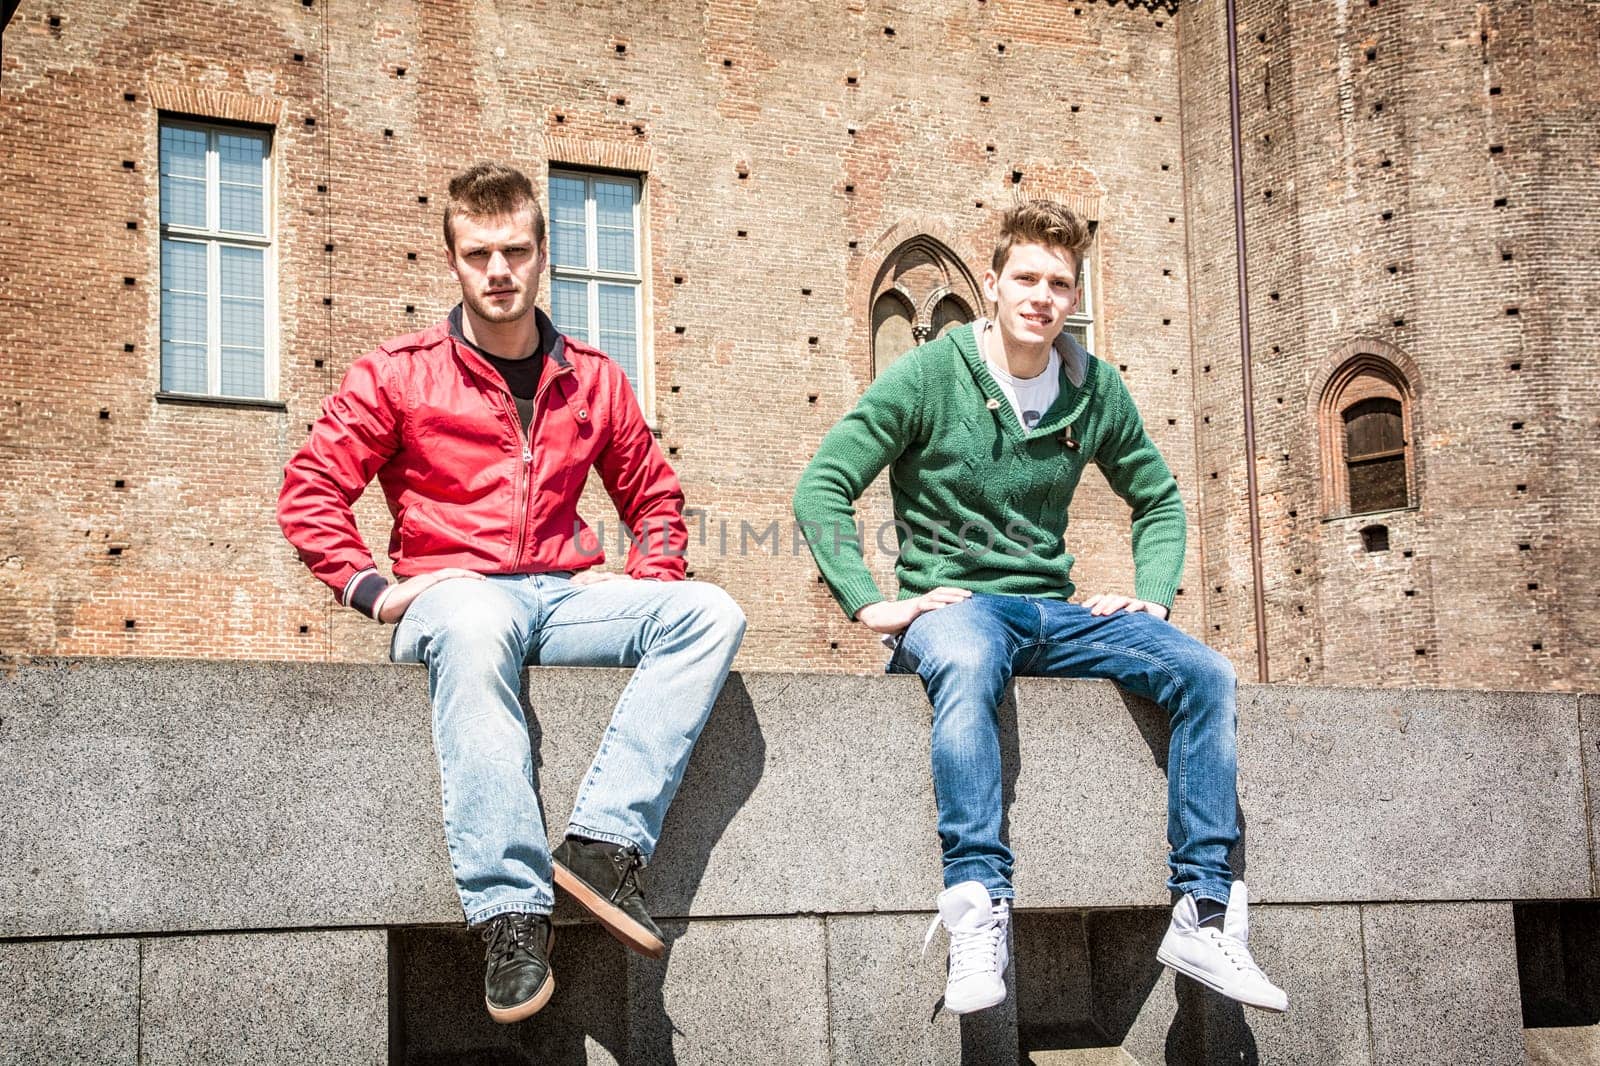 Two young men sitting on low wall in urban setting by artofphoto